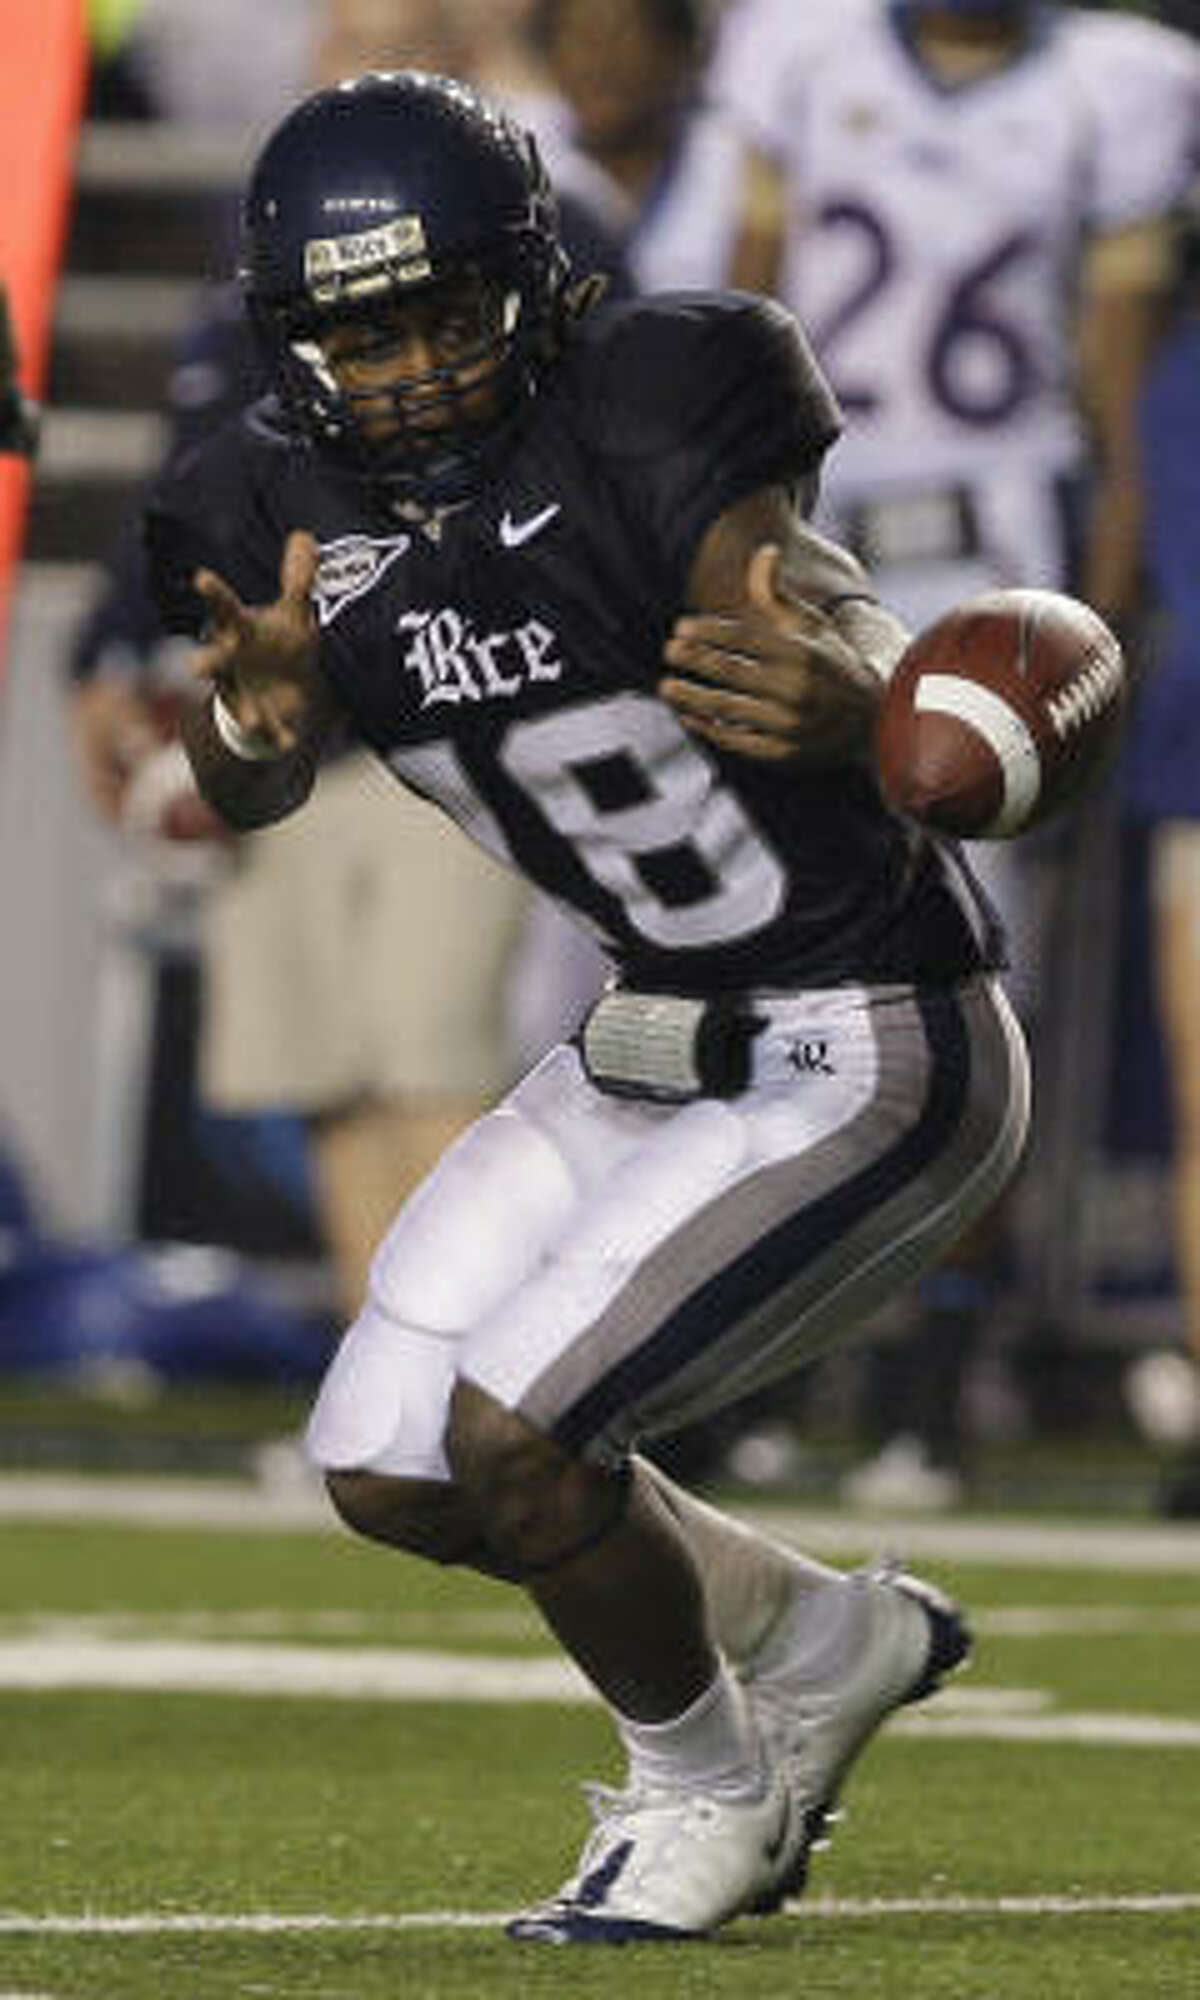 Rice's Charles Ross misses a catch during the fourth quarter.